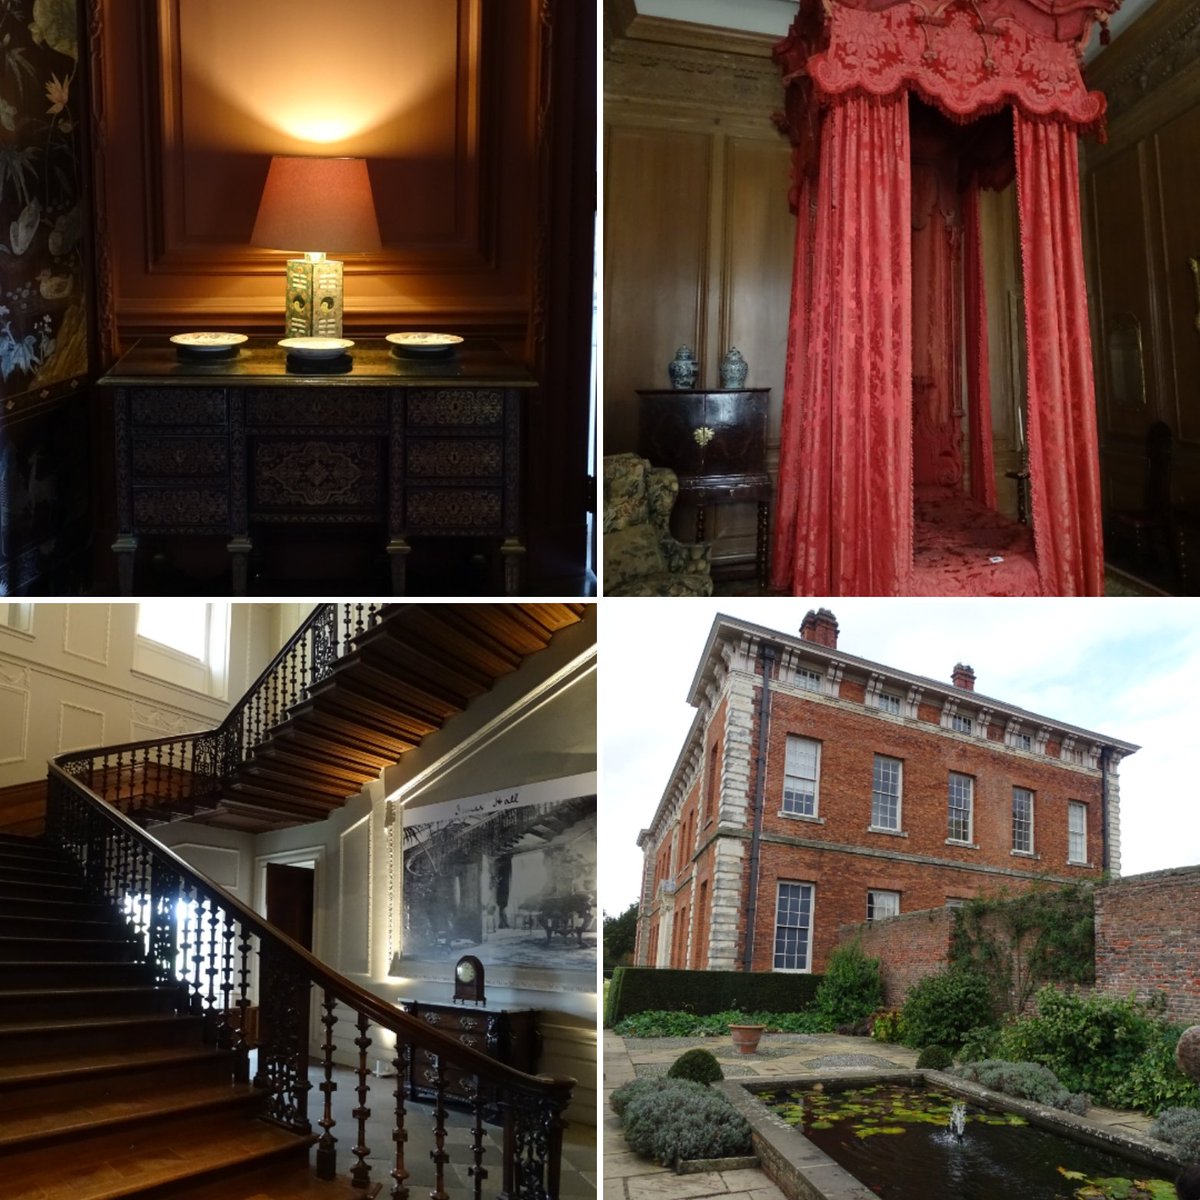 A lovely day yesterday at Beningbrough Hall #beningbrough #beningbroughhall #countryhouse #englishcountryhouse #nationaltrust #listedbuilding #classicarchitecture #northyorkshire #autumn #november